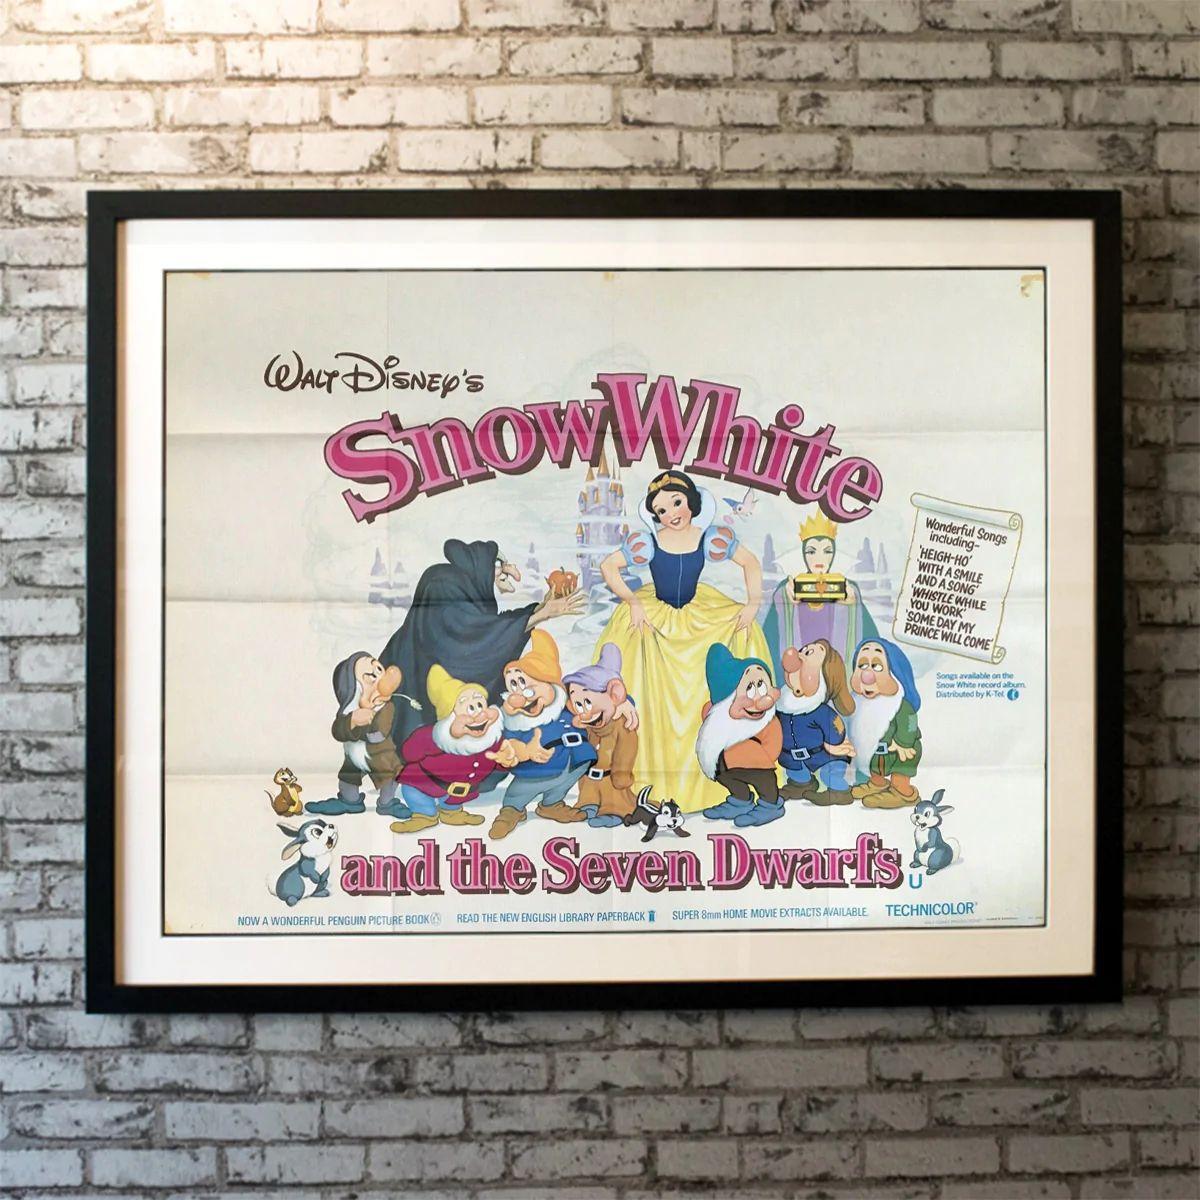 Snow White and The Seven Dwarfs, unframed poster, 1975R

Original British Quad (30 X 40 Inches). Exiled into the dangerous forest by her wicked stepmother, a princess is rescued by seven dwarf miners who make her part of their household.

Year: